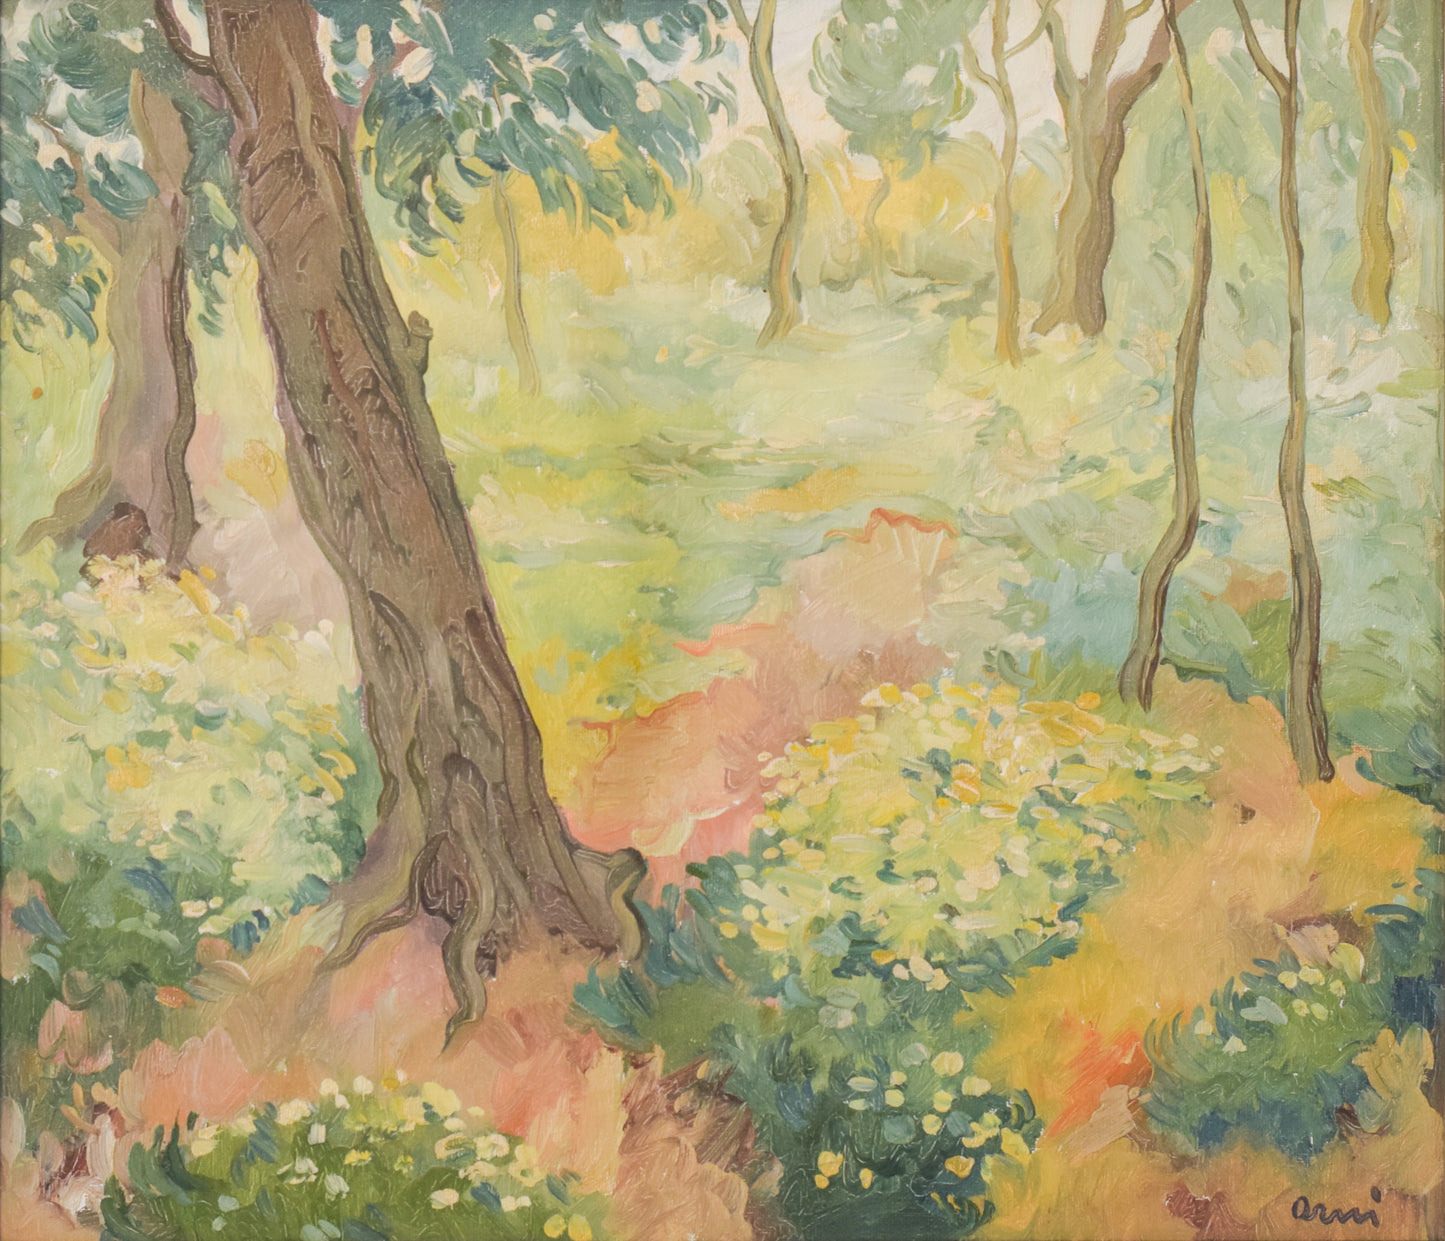 Impressionist - Wooded Landscape with Flowers